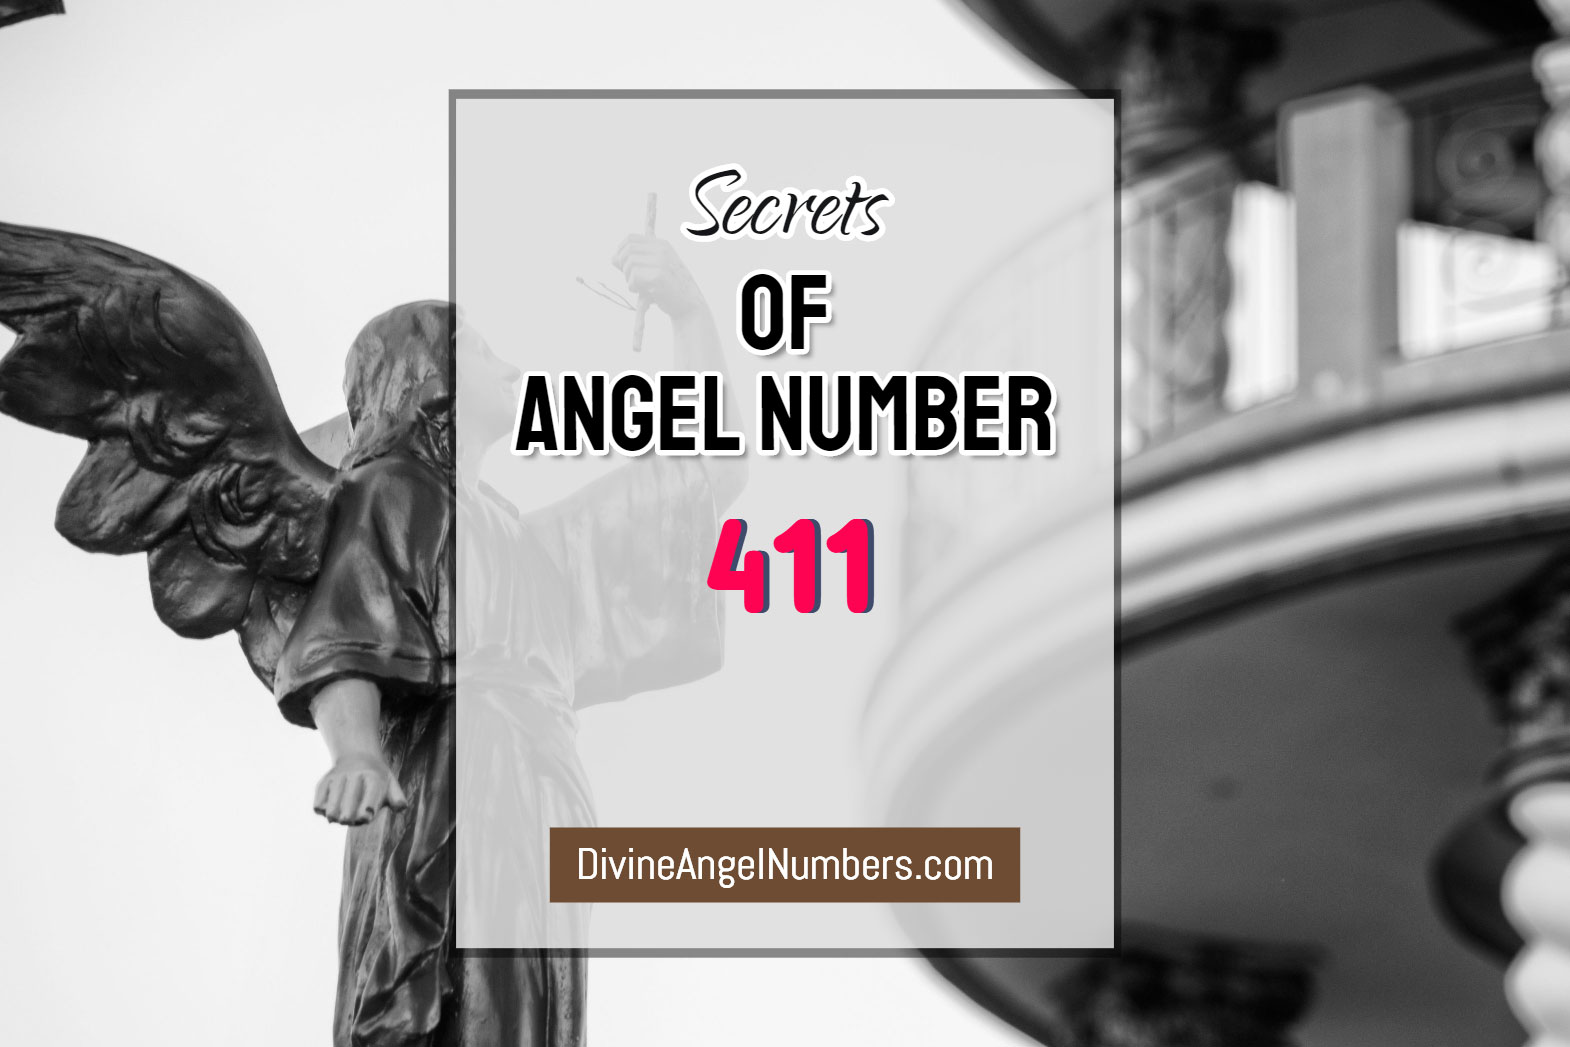 6 Reasons Why You Are Seeing Angel Number 411 - Meaning Of 411